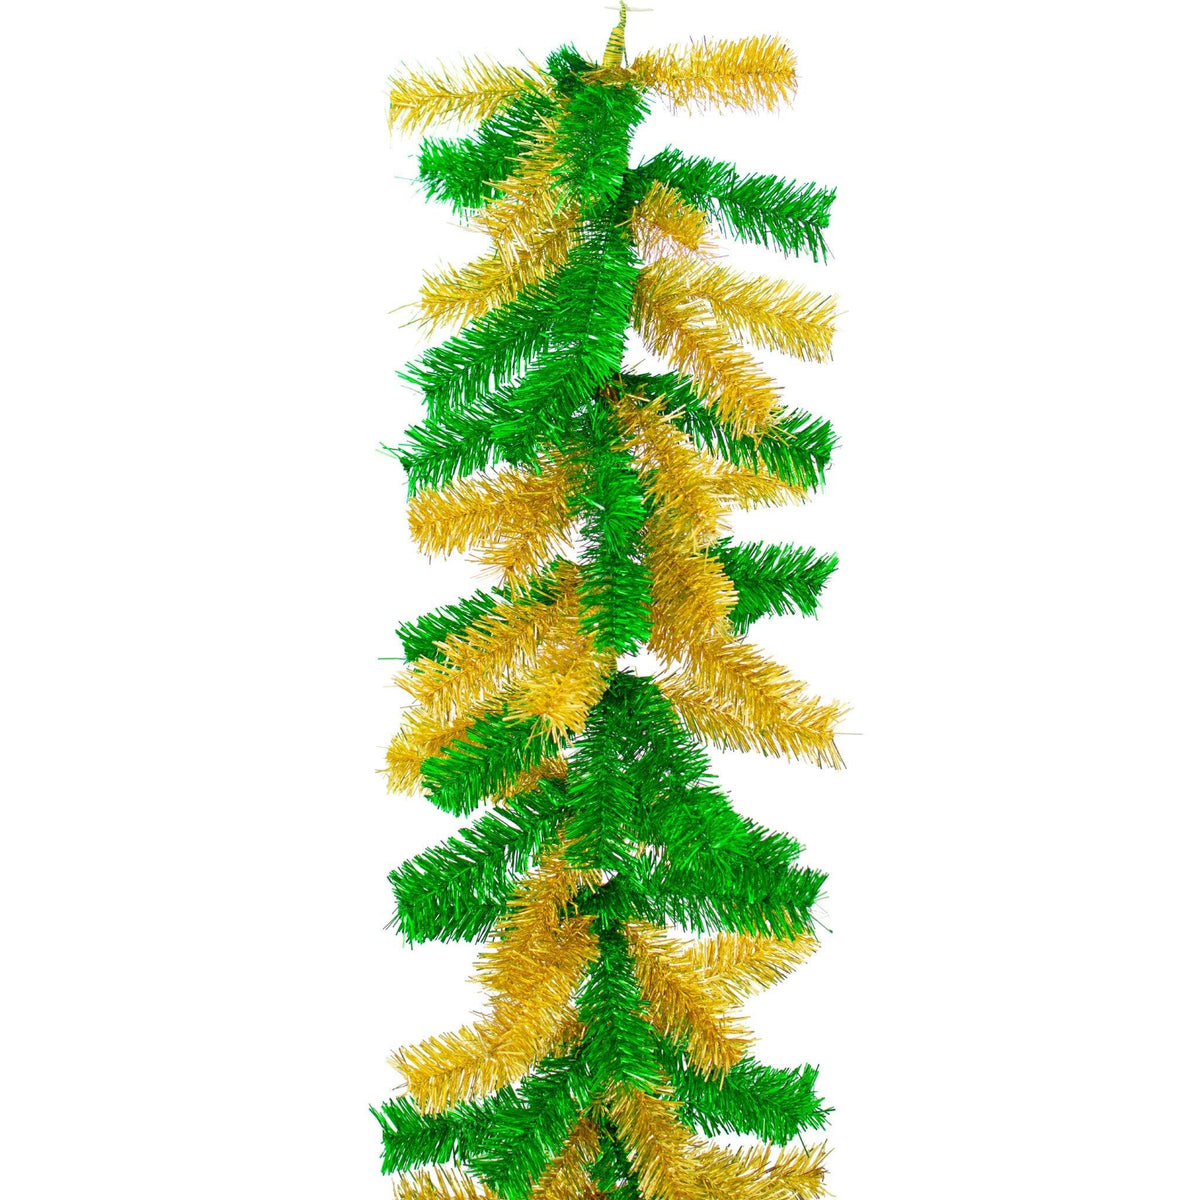 Lee Display's brand new 6ft St. Patrick's Day Christmas Brush Garland is made in the USA and on sale at leedisplay.com